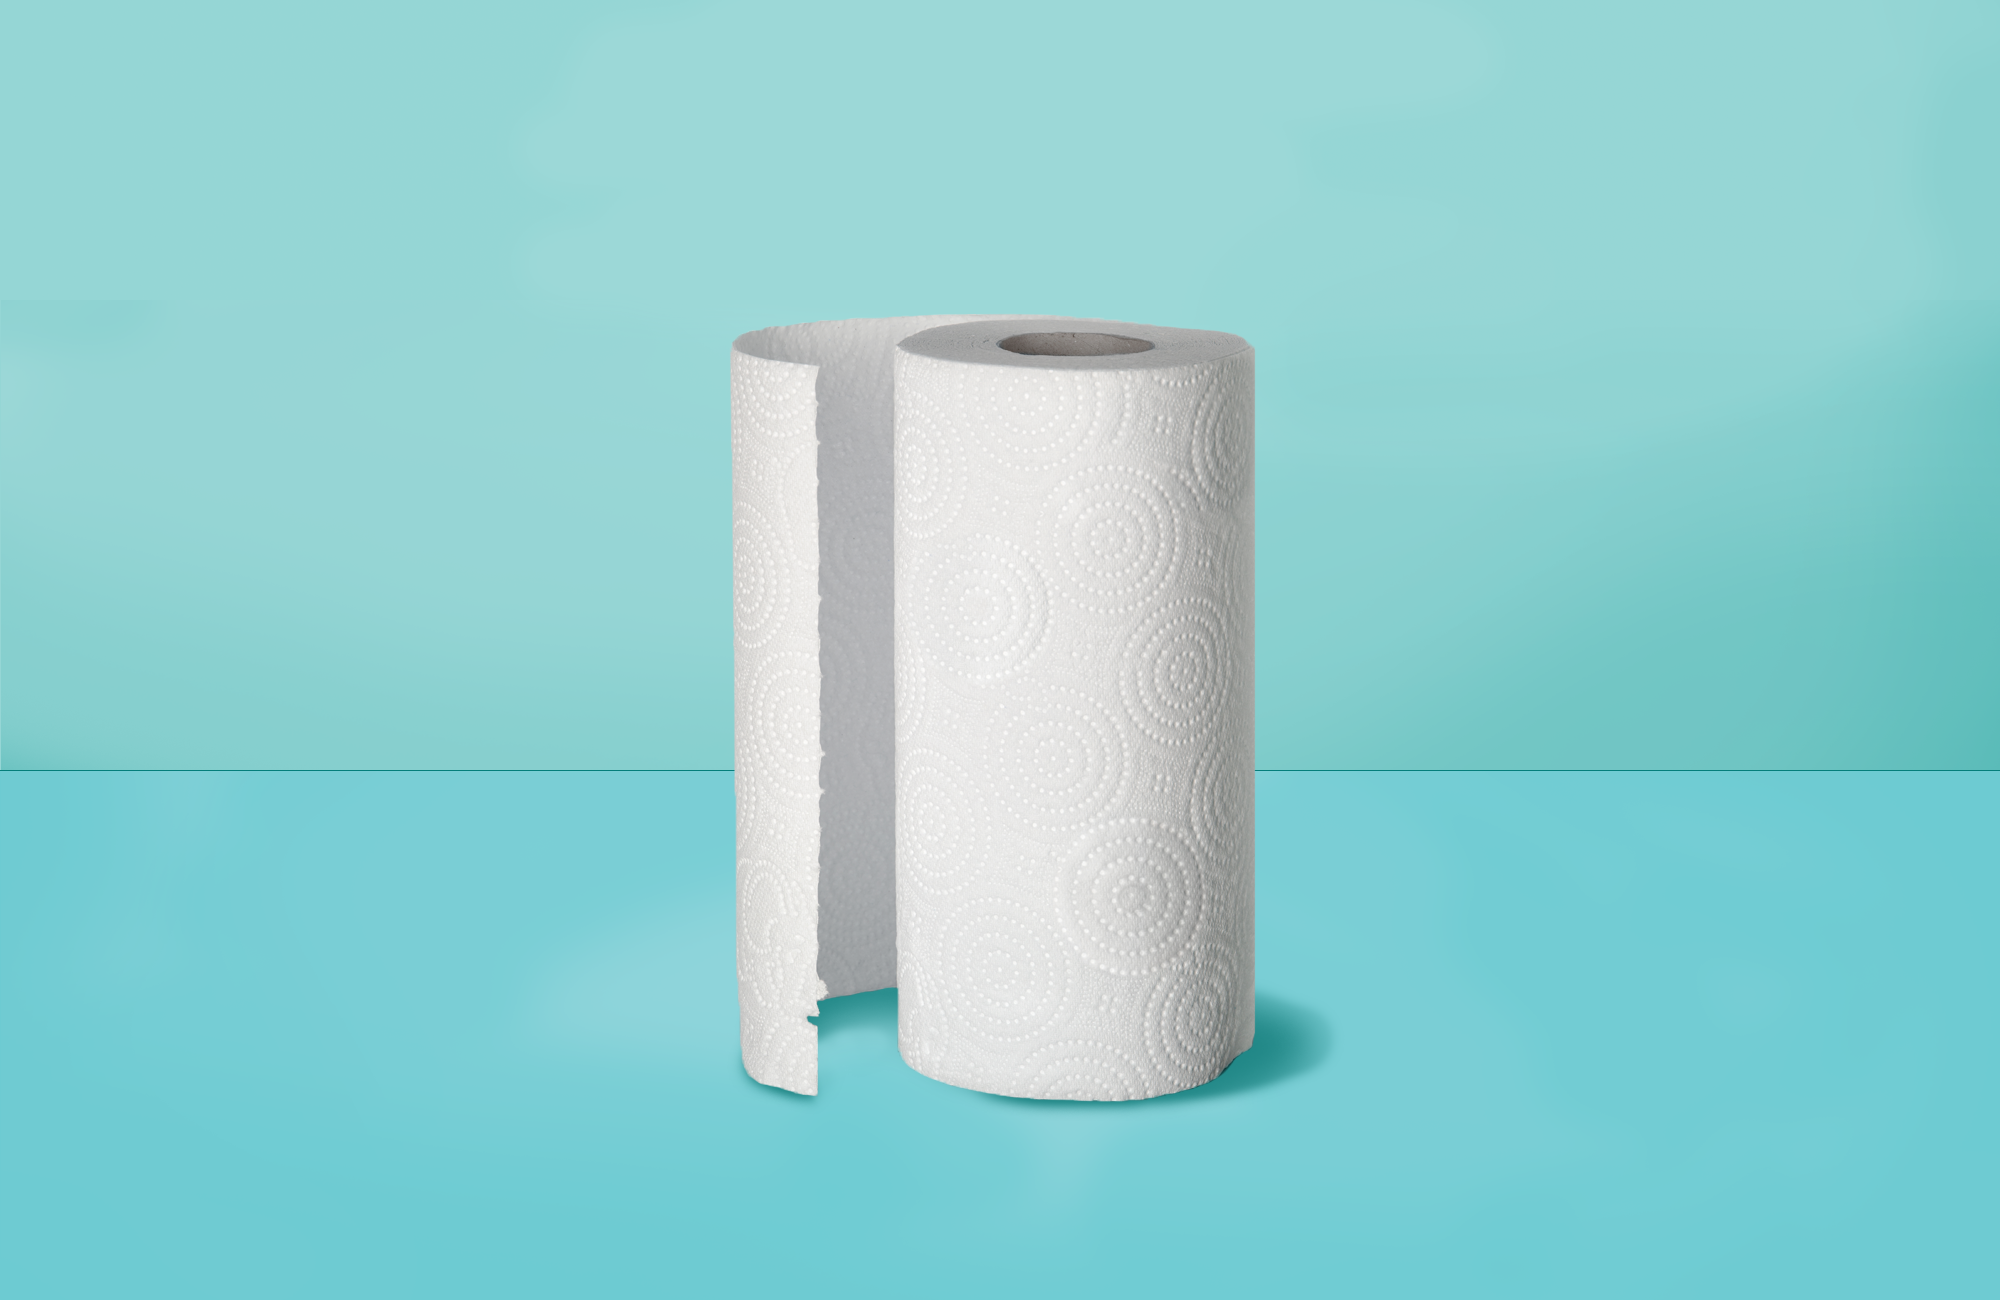 Acrylic Paper Towel Holder + Reviews